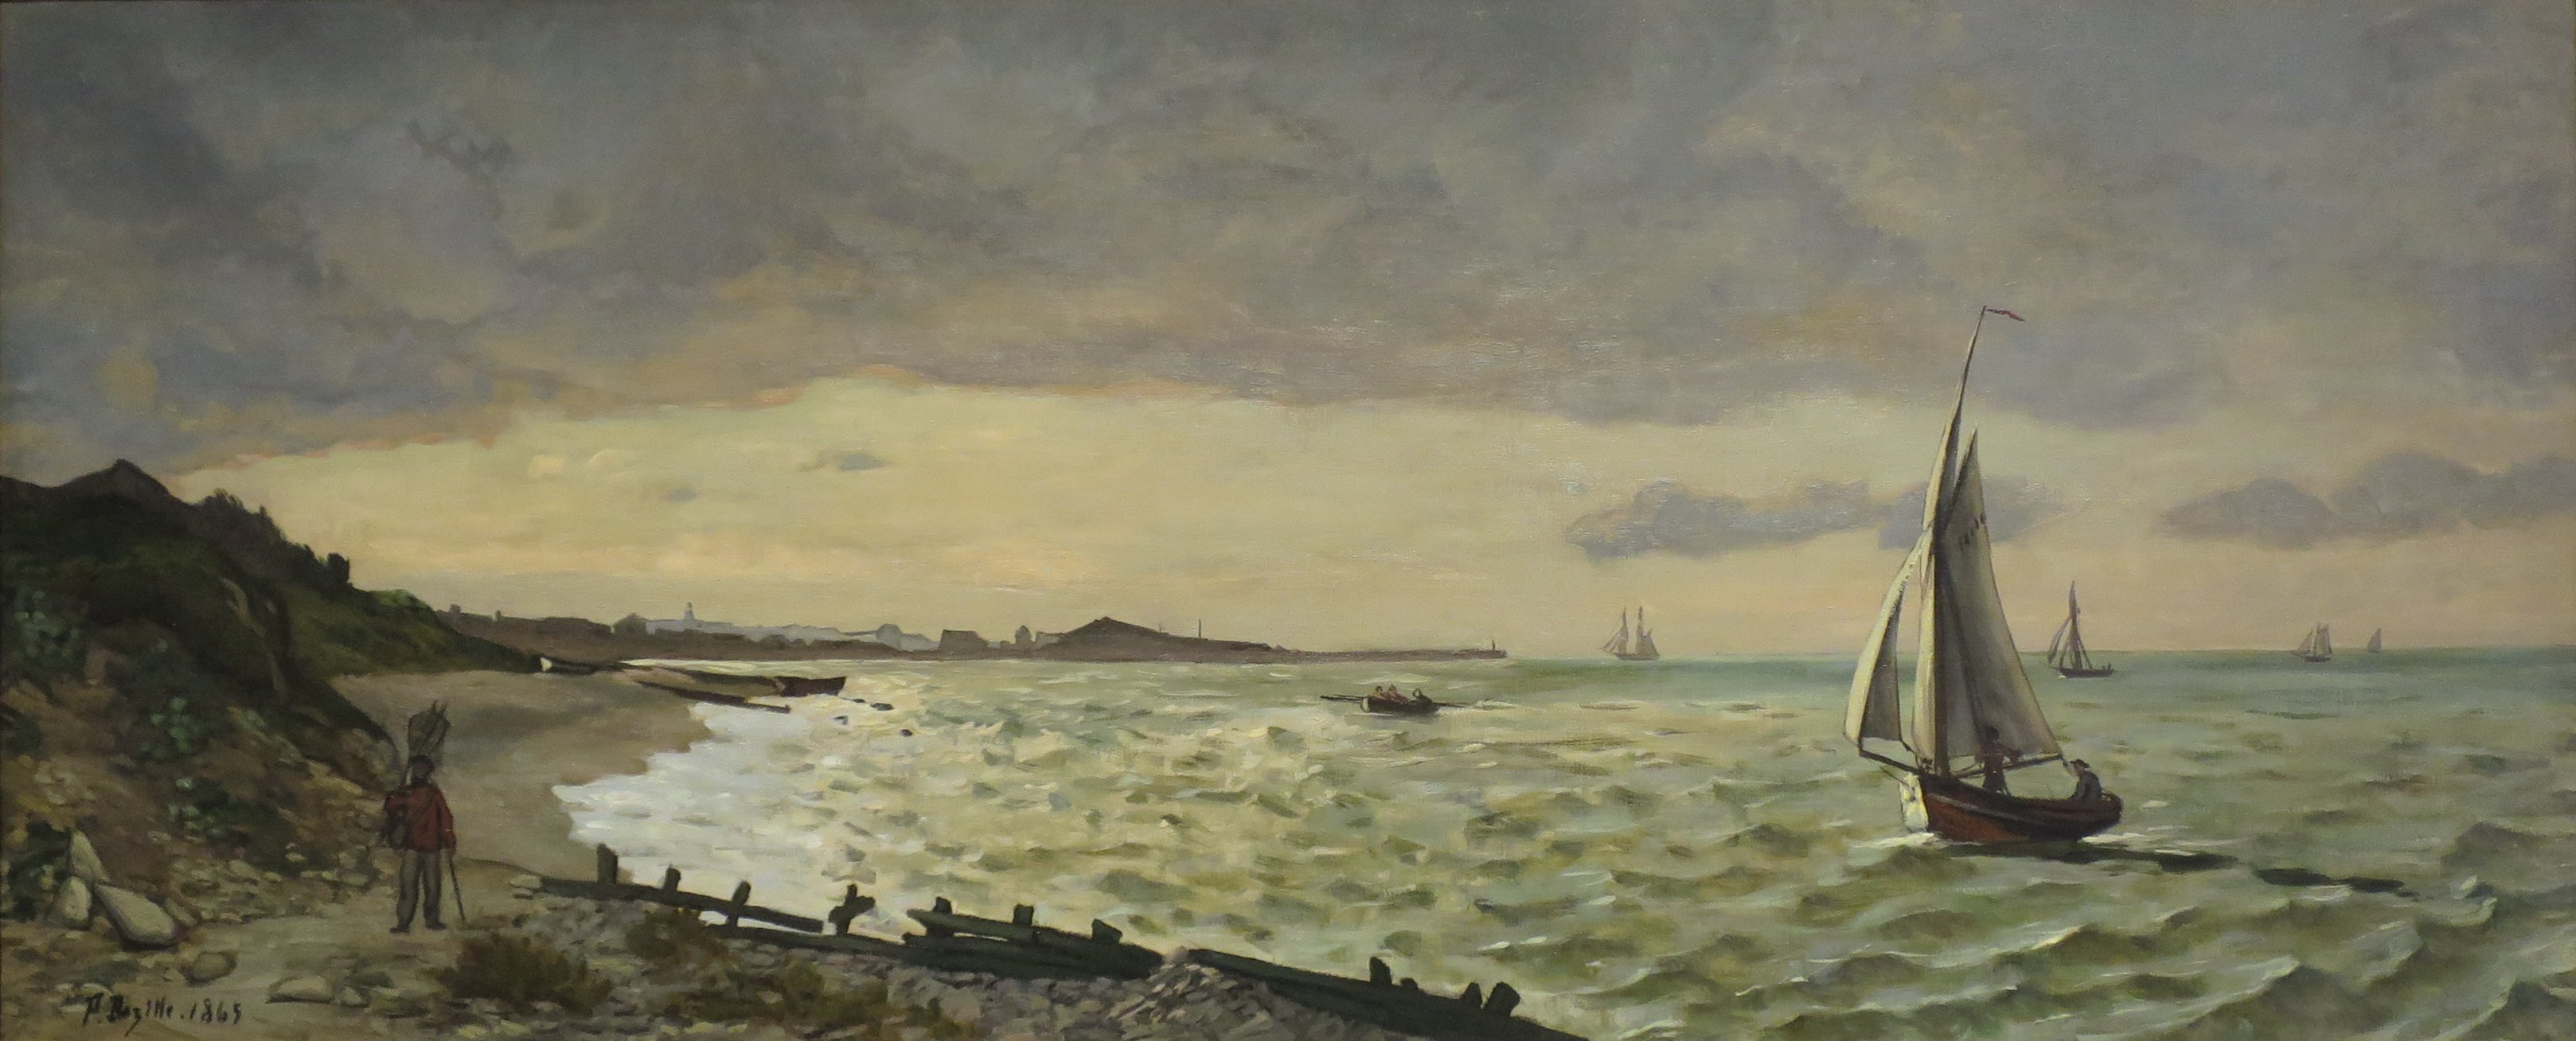 The Beach at Sainte-Adresse by Frédéric Bazille, High Museum of Art